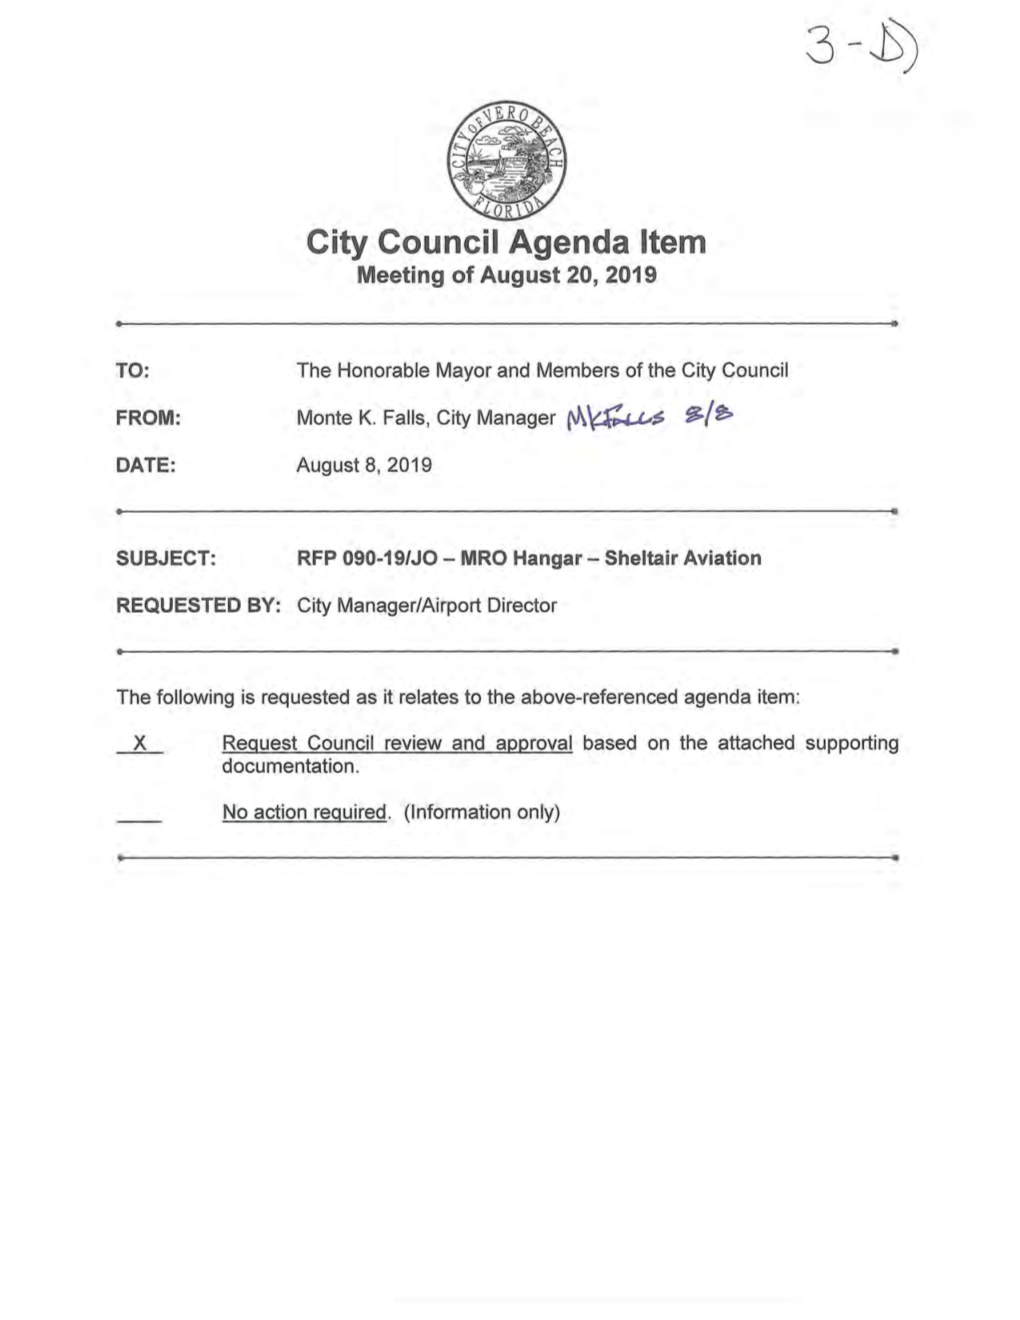 City Council Agenda Item Meeting of August 20, 2019